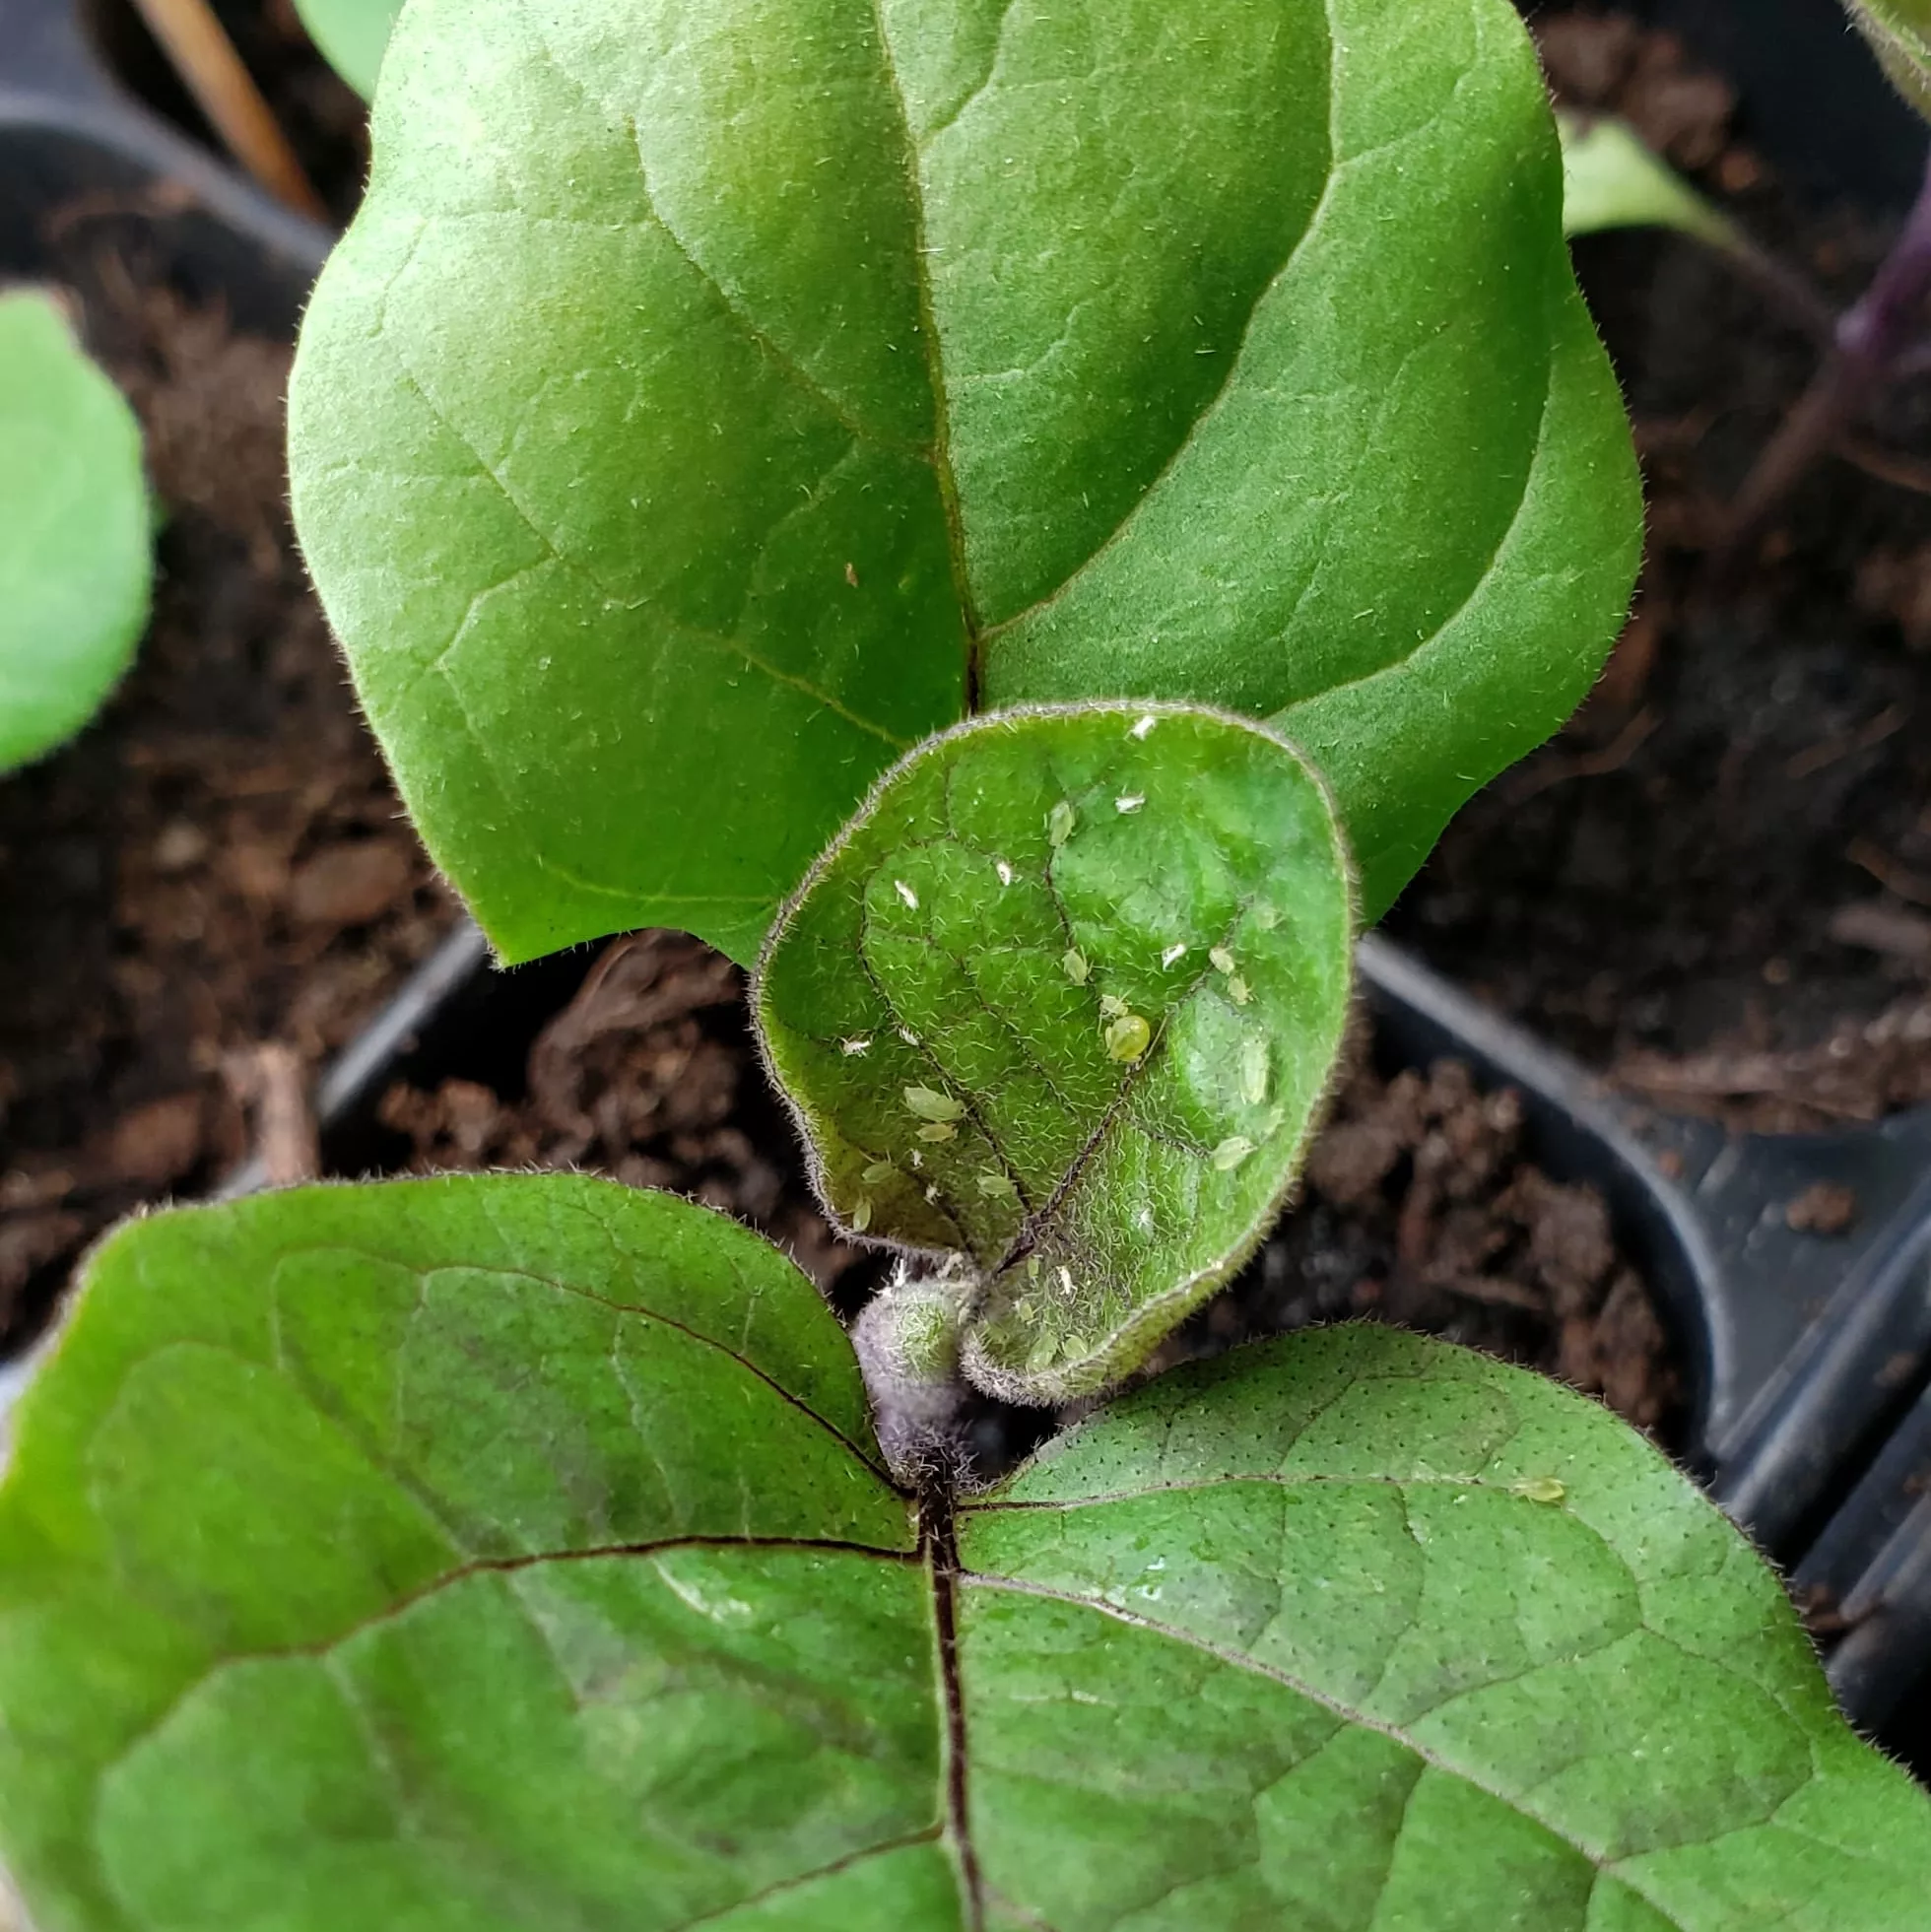 Green aphids on an eggplant leaf